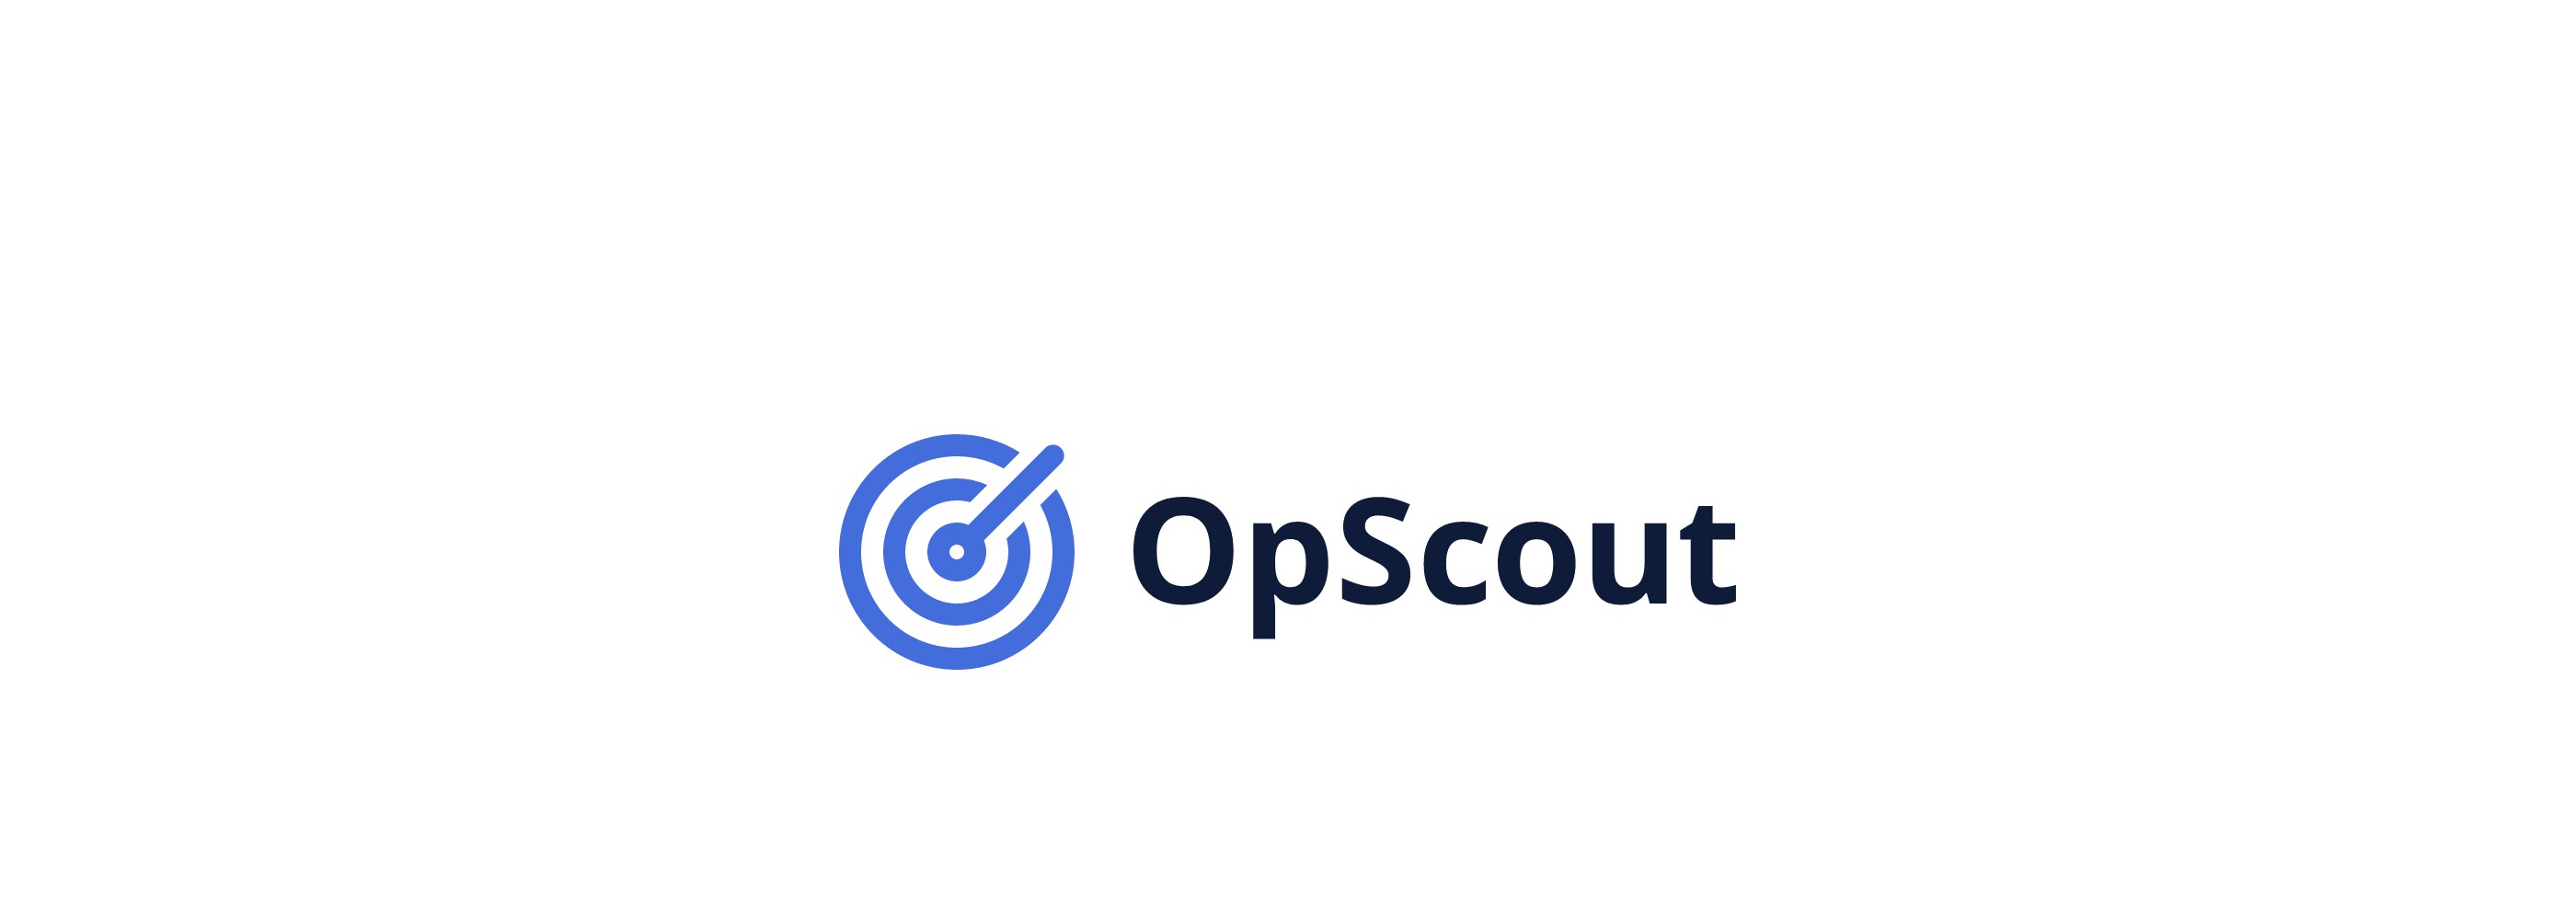 OpScout – Branding, UI/UX Design for Mobile and Web Apps